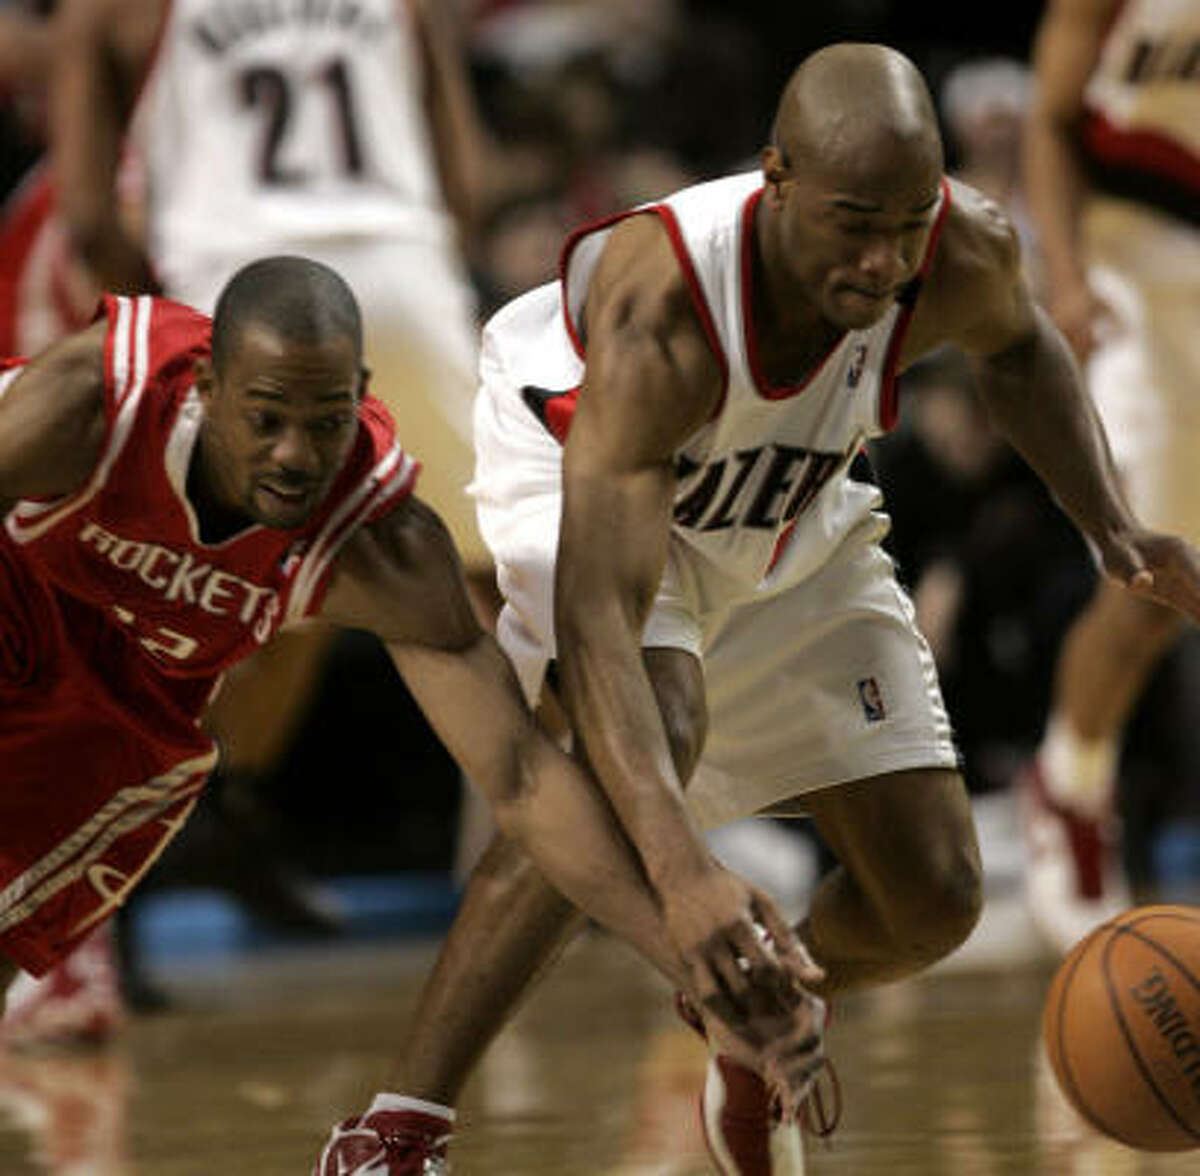 The Rockets showed a heaping helping of hustle Wednesday night, with Rockets guard Rafer Alston, left, knocking this ball away from Trail Blazers guard Jarrett Jack.